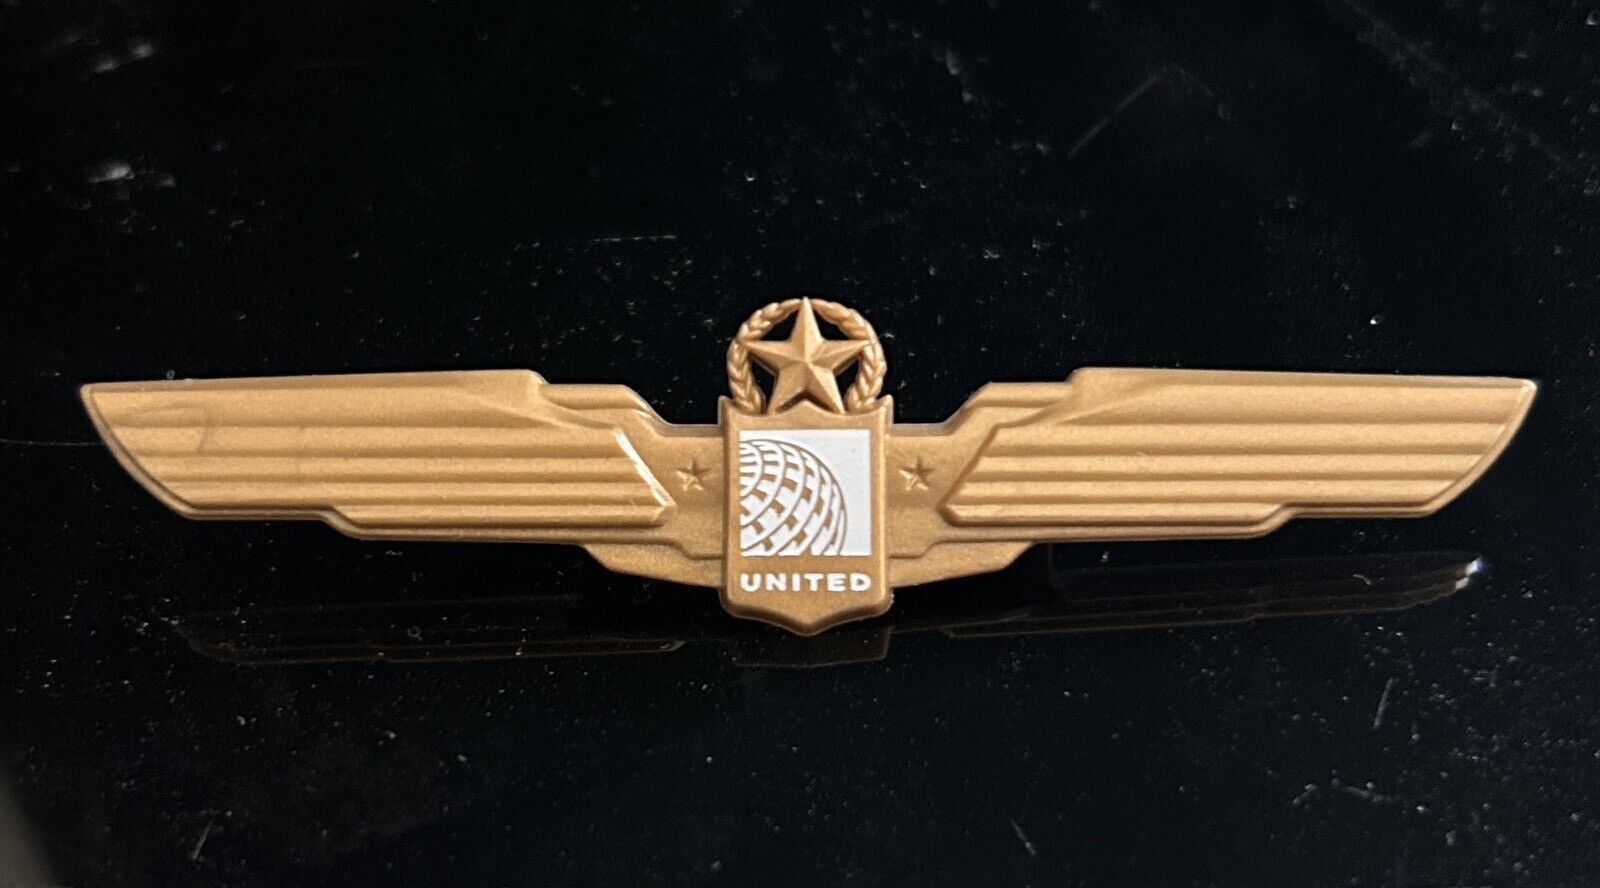 United Airlines Wings Plastic Pin (Aviation Souvenir)